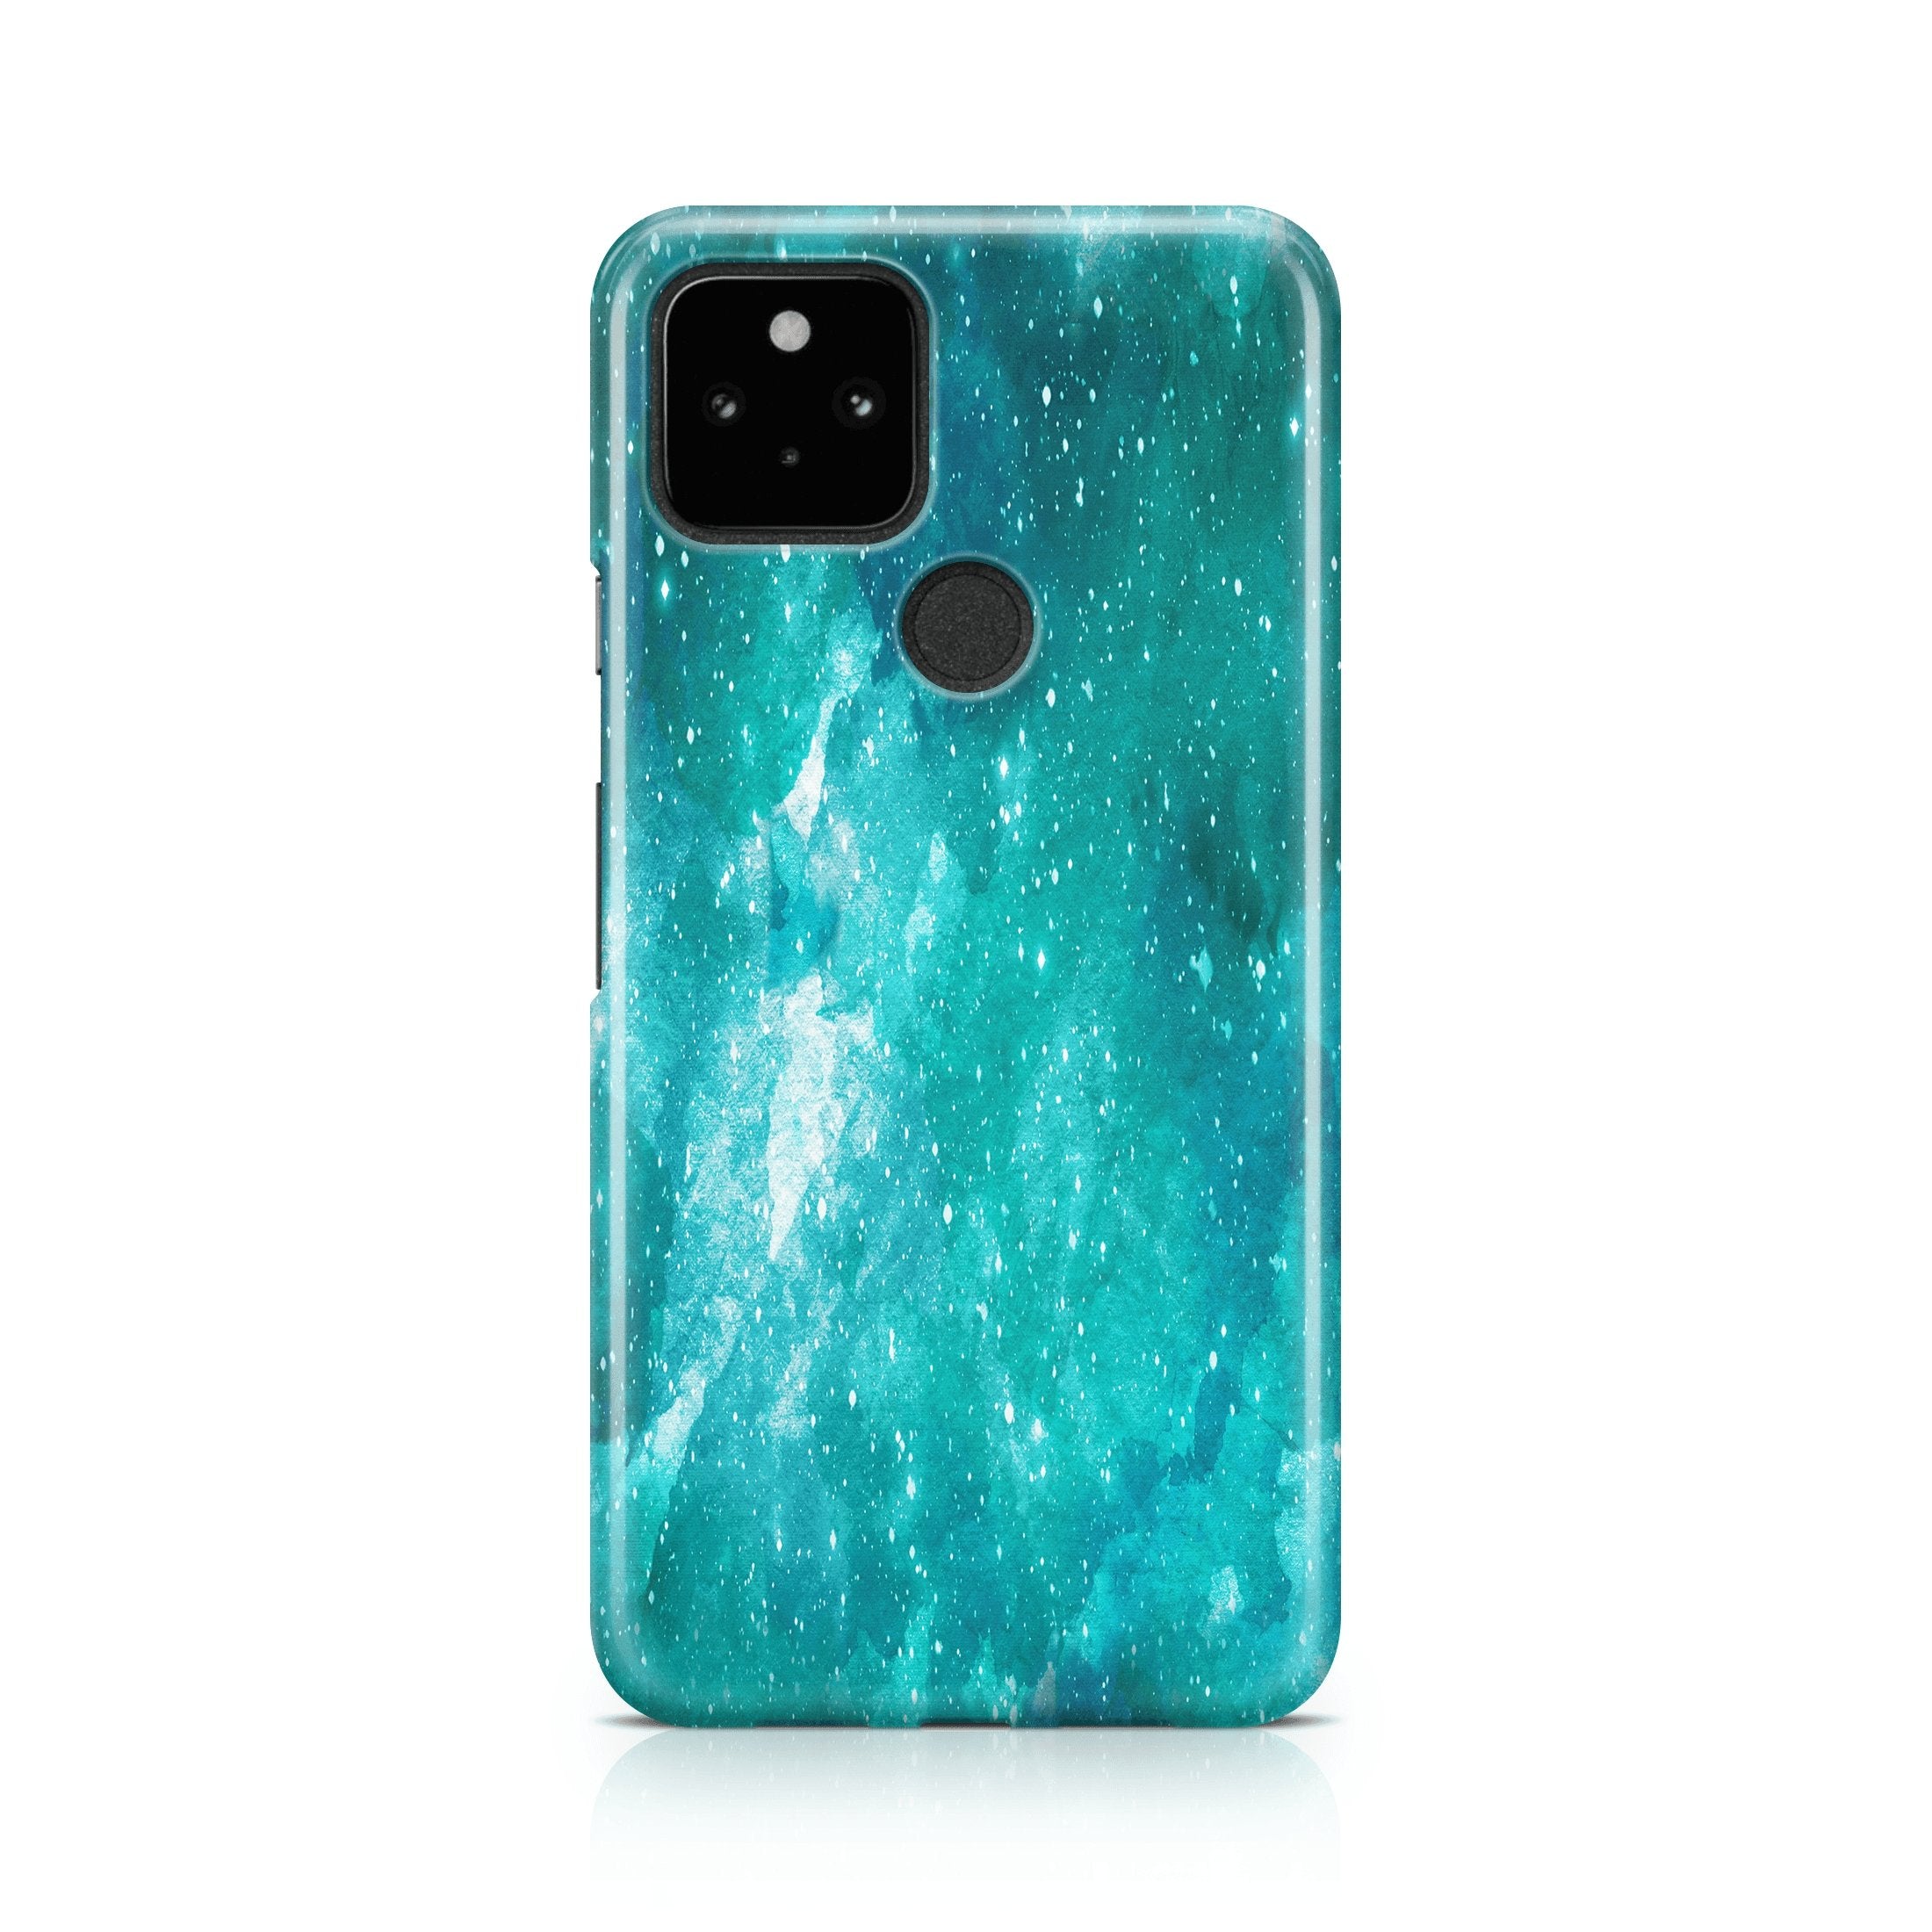 Green Space - Google phone case designs by CaseSwagger